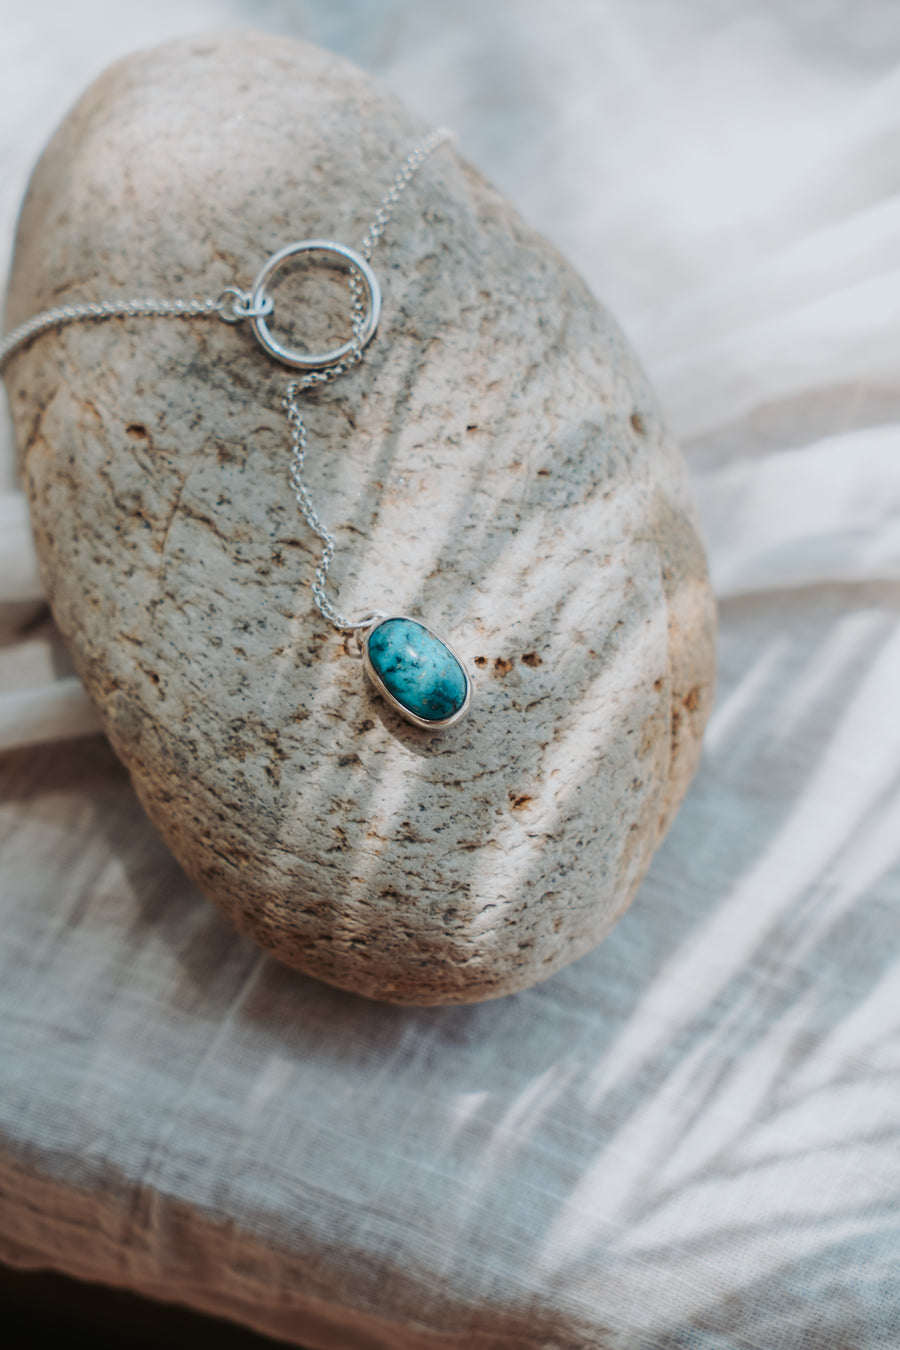 The Dainty Lariat in Sonoran Gem Turquoise